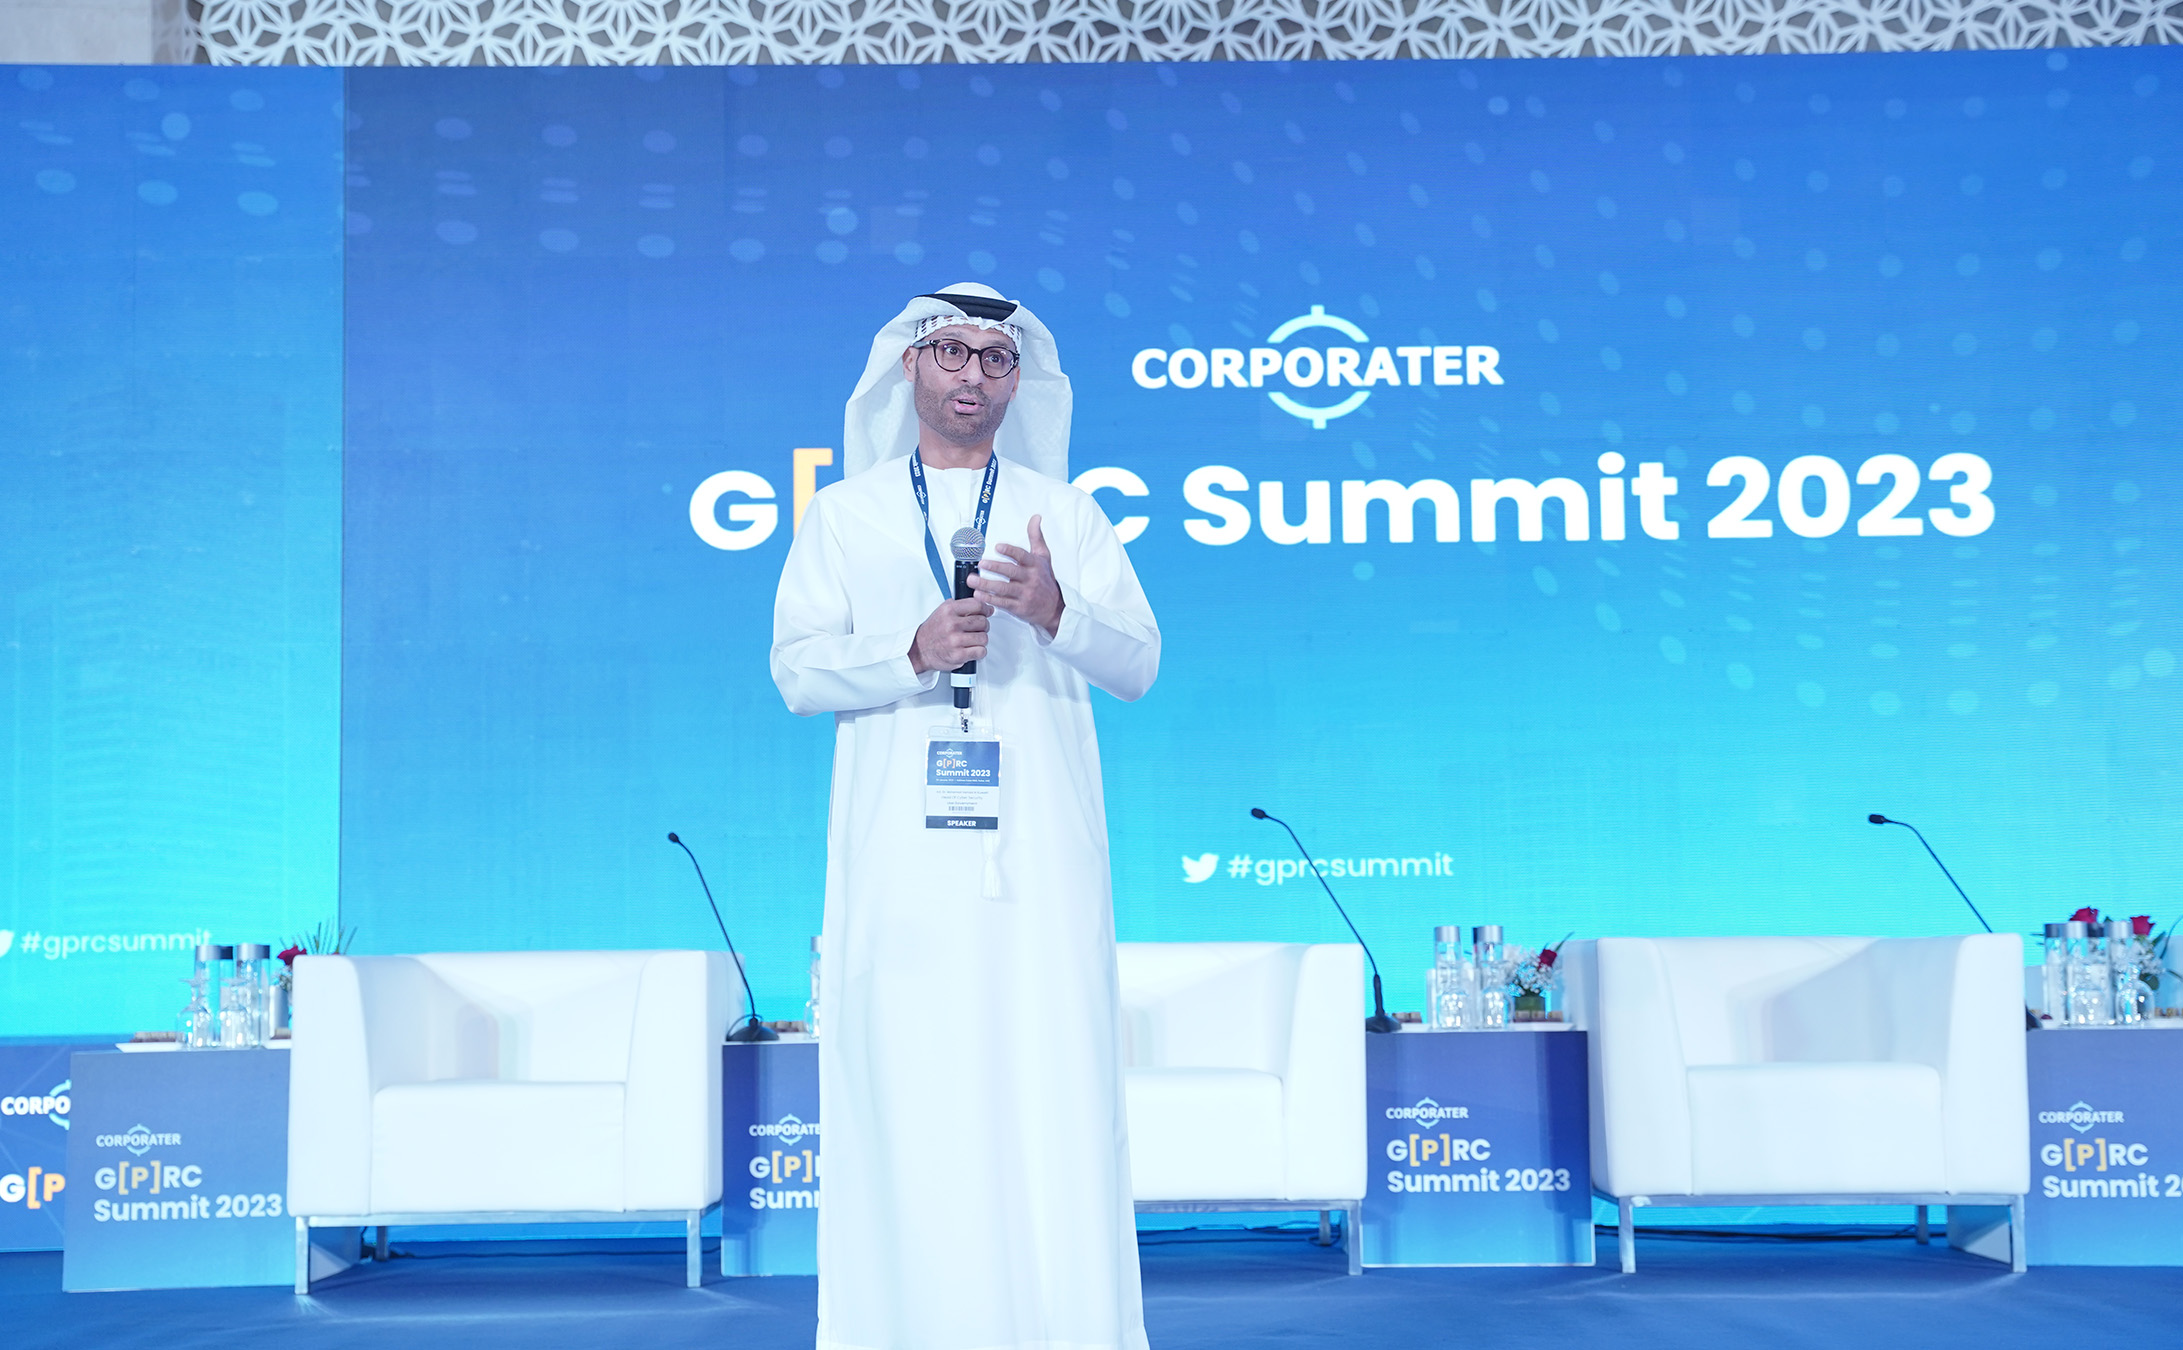 Opening of the GPRC Summit by H.E. Dr. Mohamed Al Kuwaiti